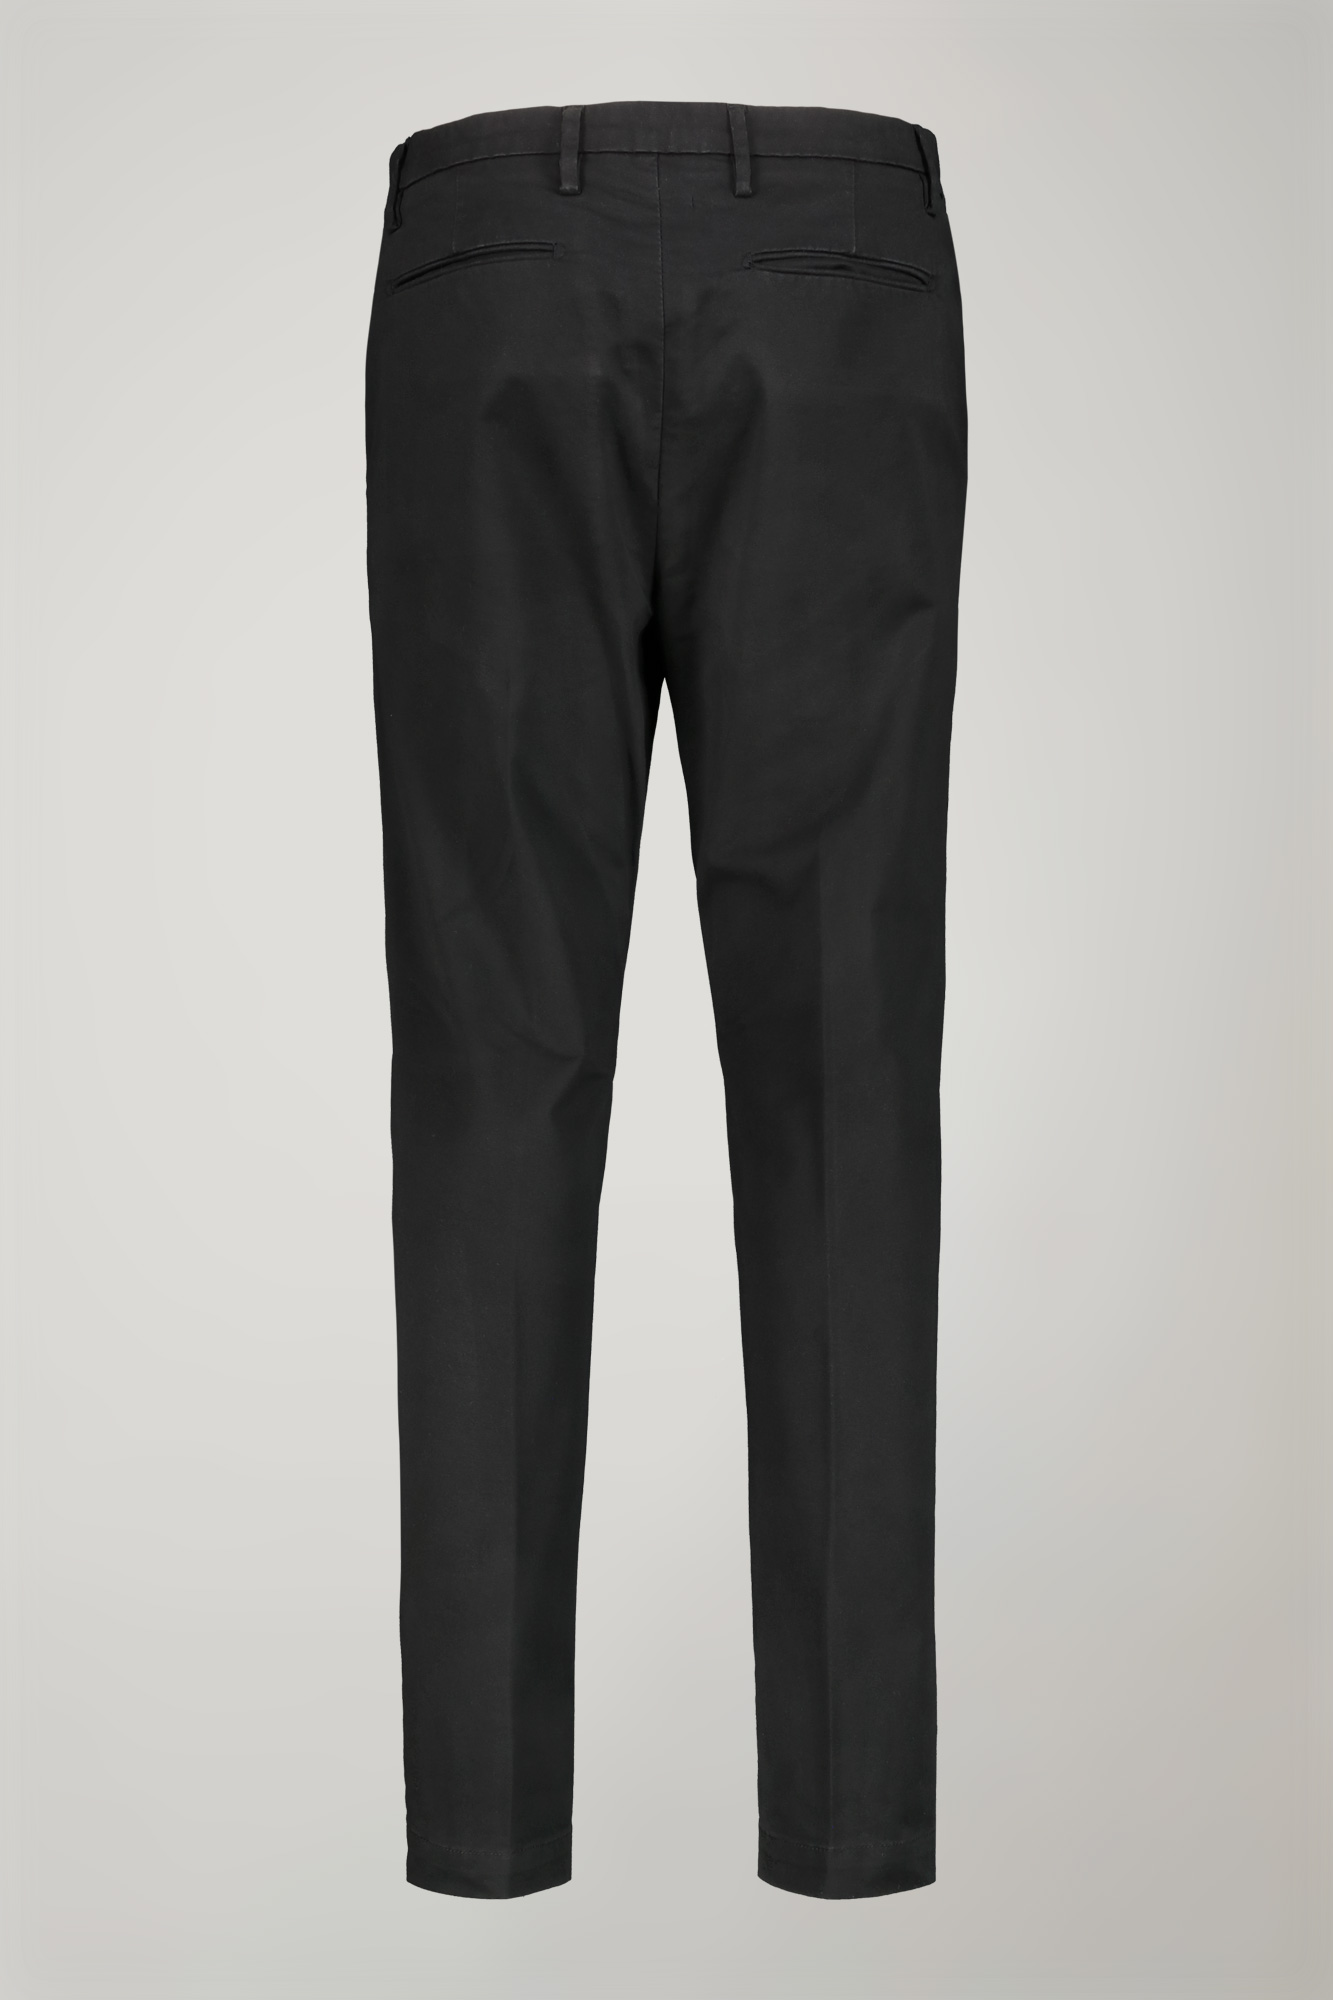 Men's chino trousers classic twill construction perfect fit image number null